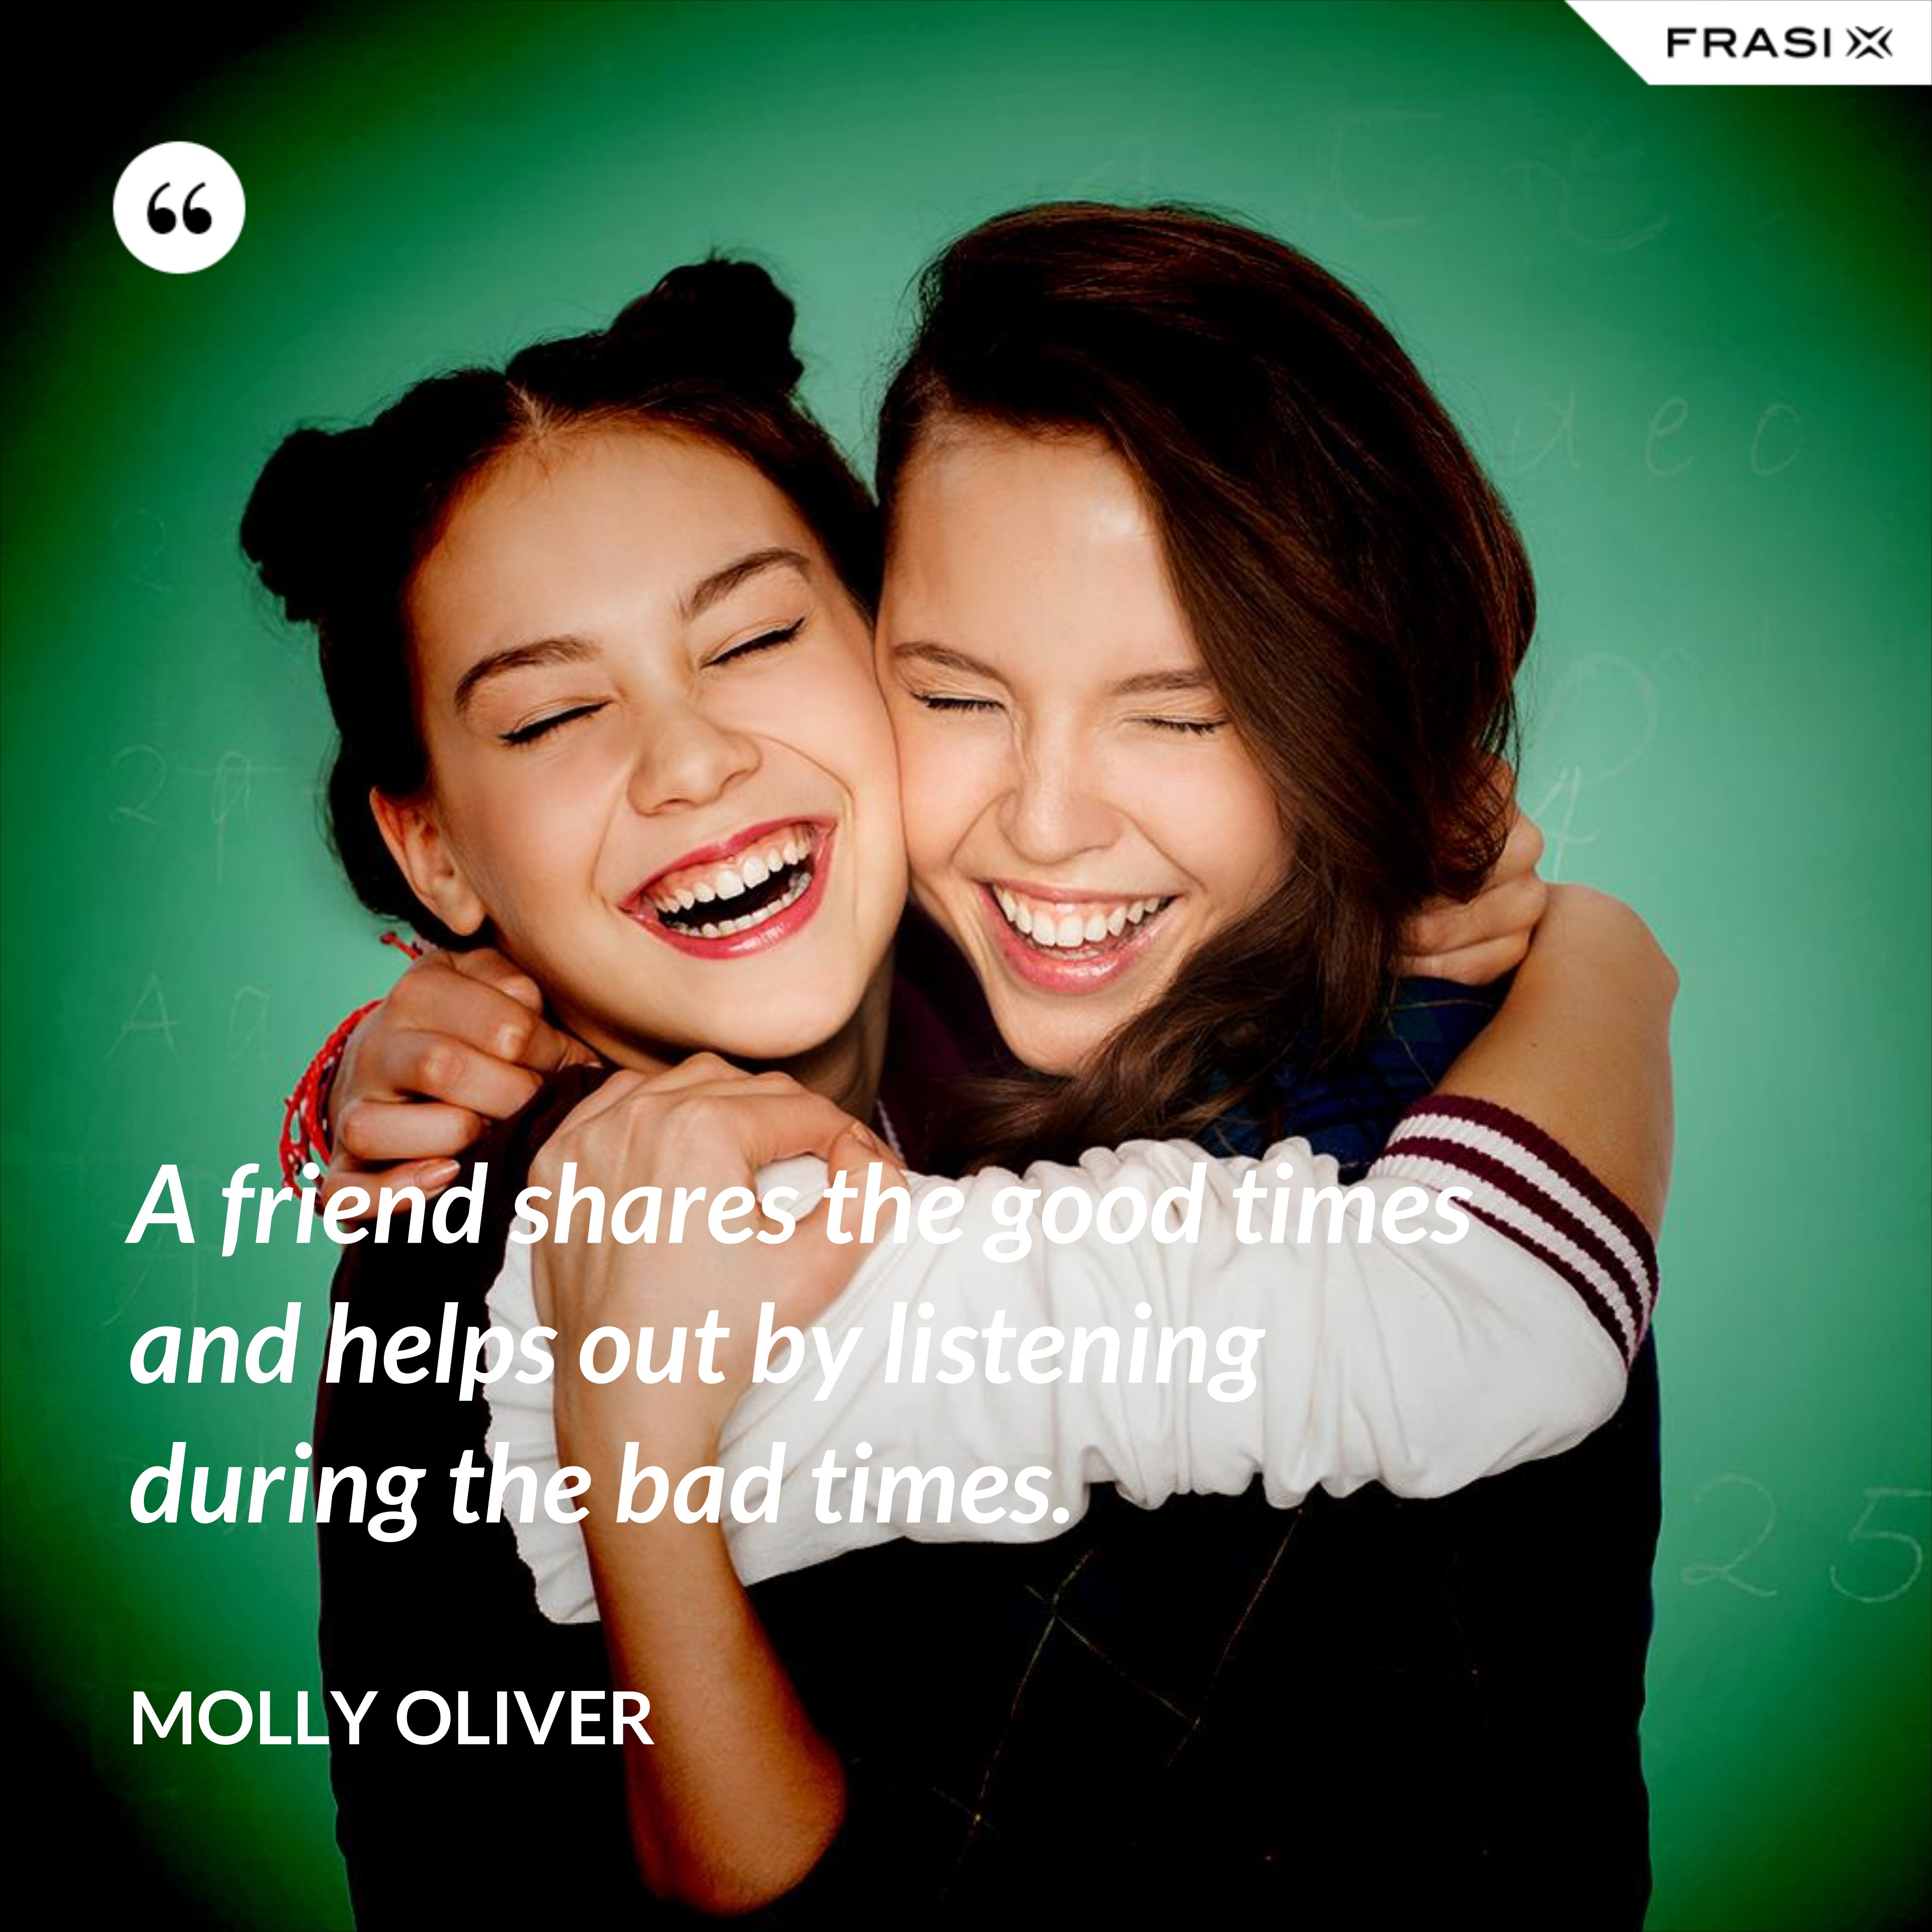 A friend shares the good times and helps out by listening during the bad times. - Molly Oliver